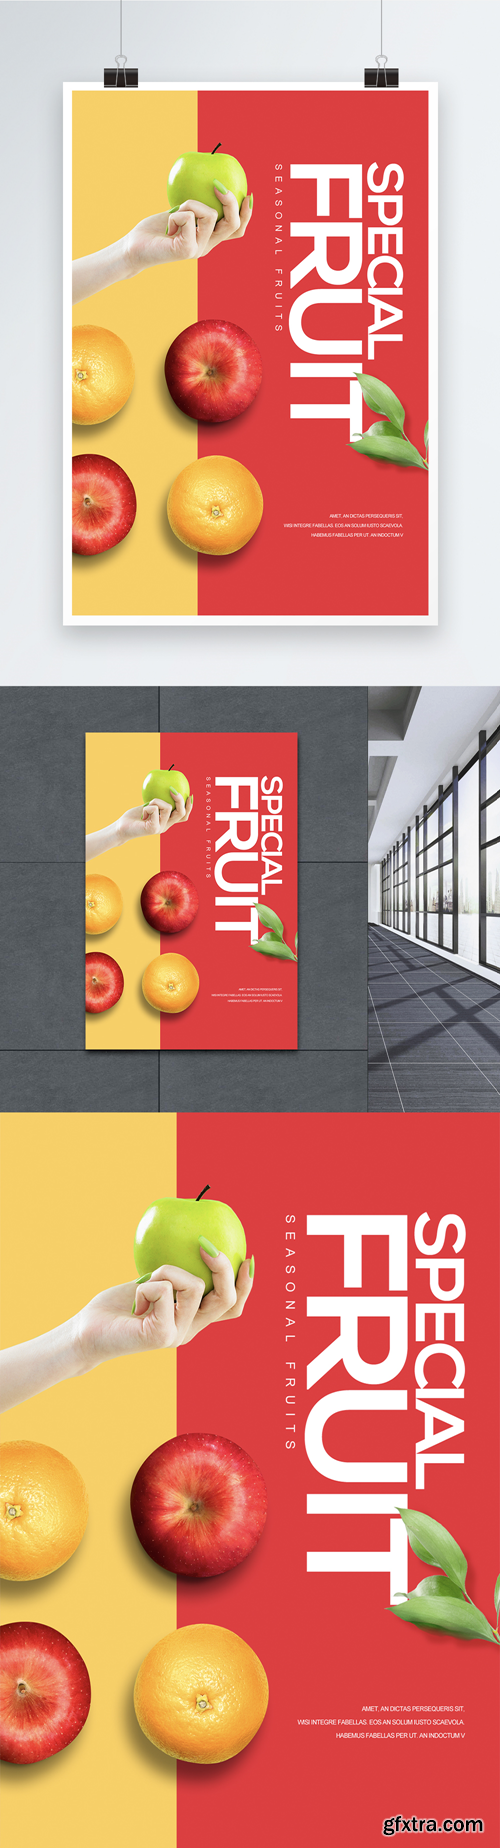 variety of fruit personalized poster design